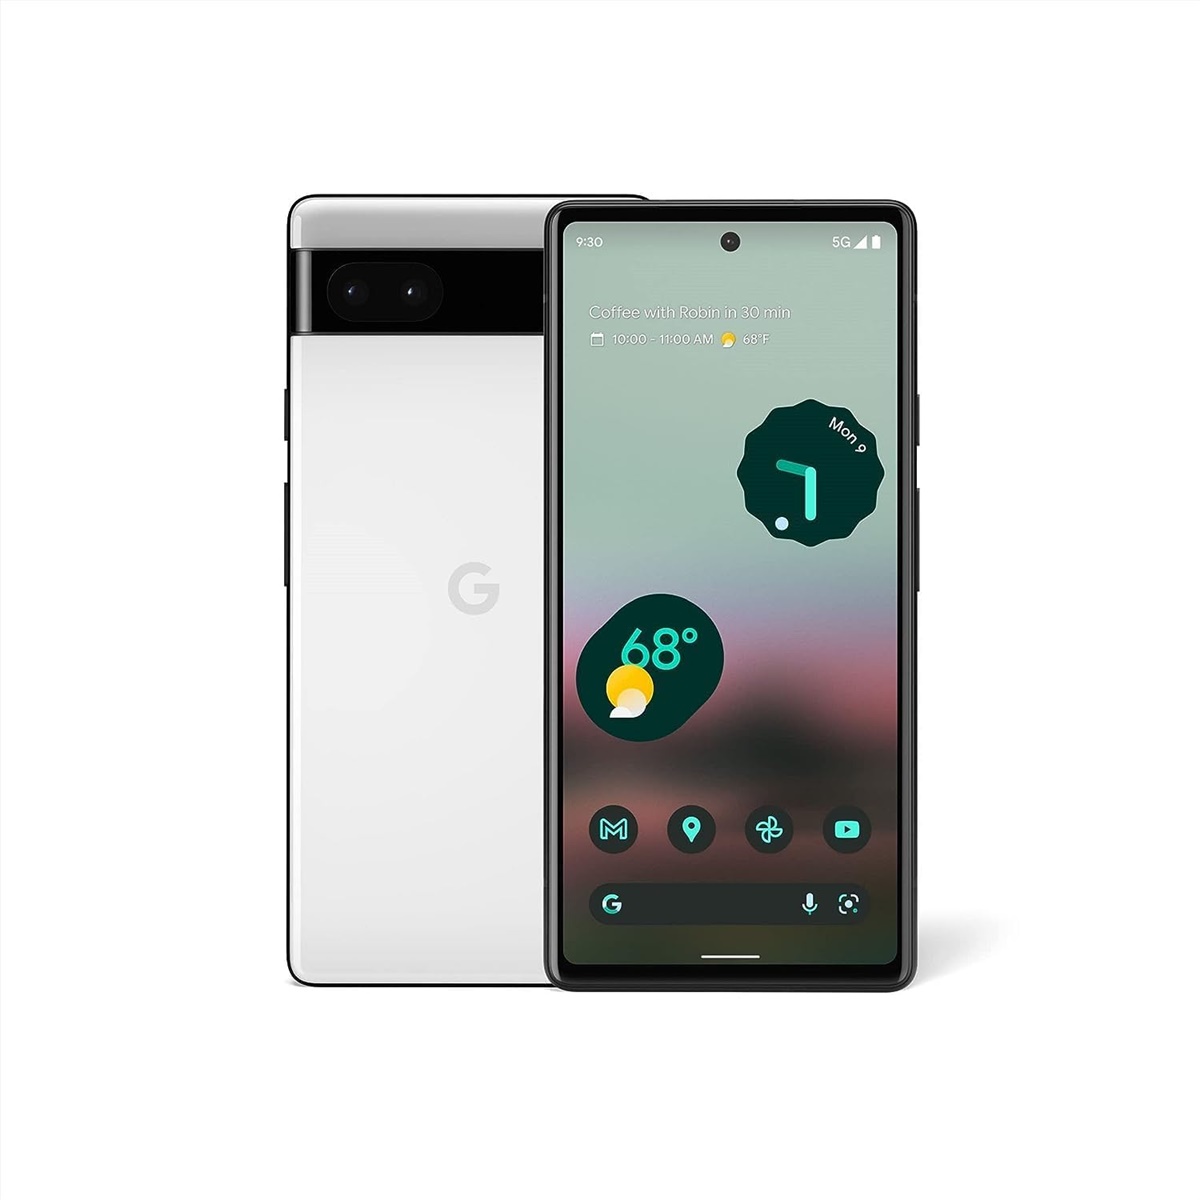 Google Pixel 6a Released 2022, July 21, 178g, 8.9mm thickness, Android 12, up to Android 14, 128GB storage, no card slot, 6.1"1080x2400 pixels, 12MP2160p, 6GB RAMGoogle Tensor, 4410mAh18W